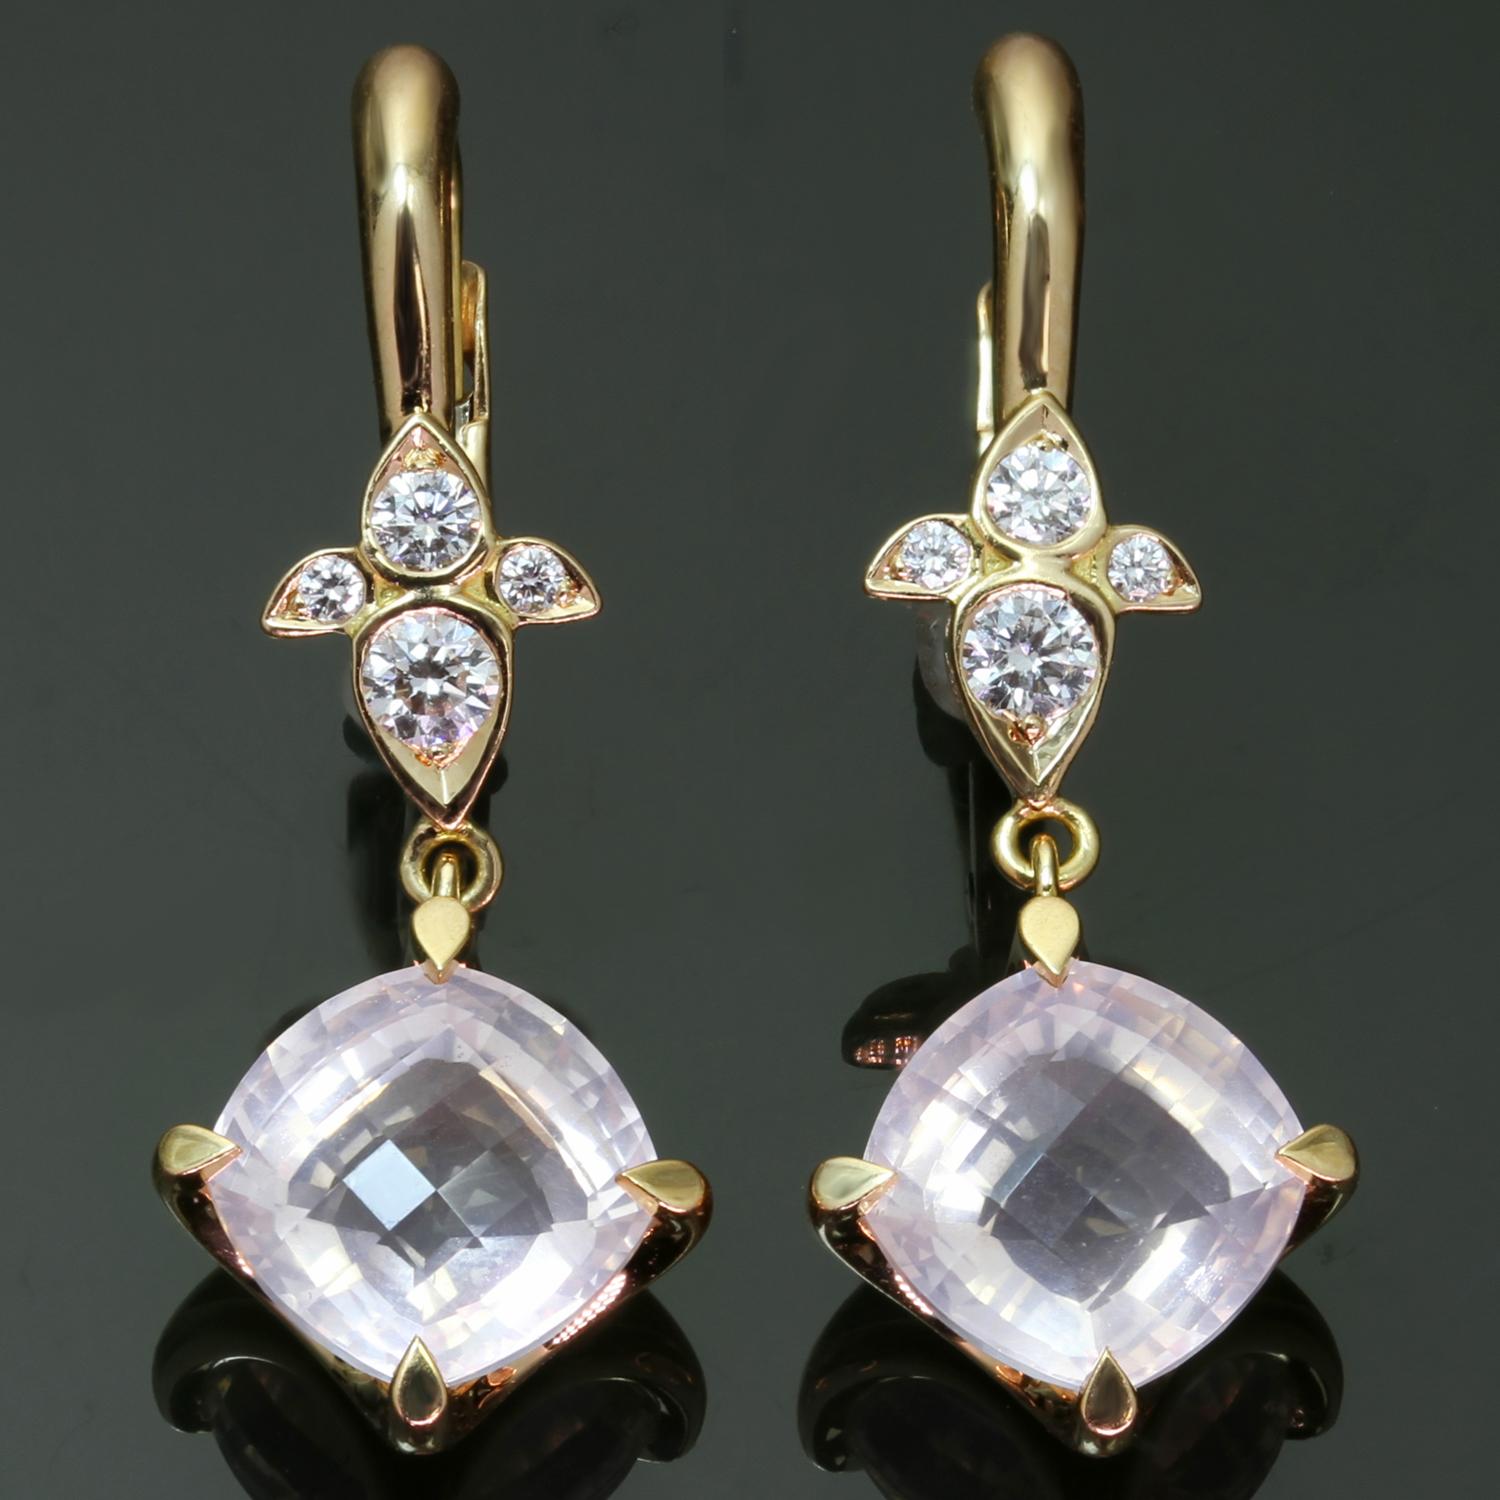 These fabulous dangling earrings from Cartier's elegant Mysterieuse collection are crafted in 18k rose gold and set with faceted rose quartz and accented with brilliant-cut round D-E-F VVS1-VVS2 diamonds. Made in France circa 2010s. Measurements: